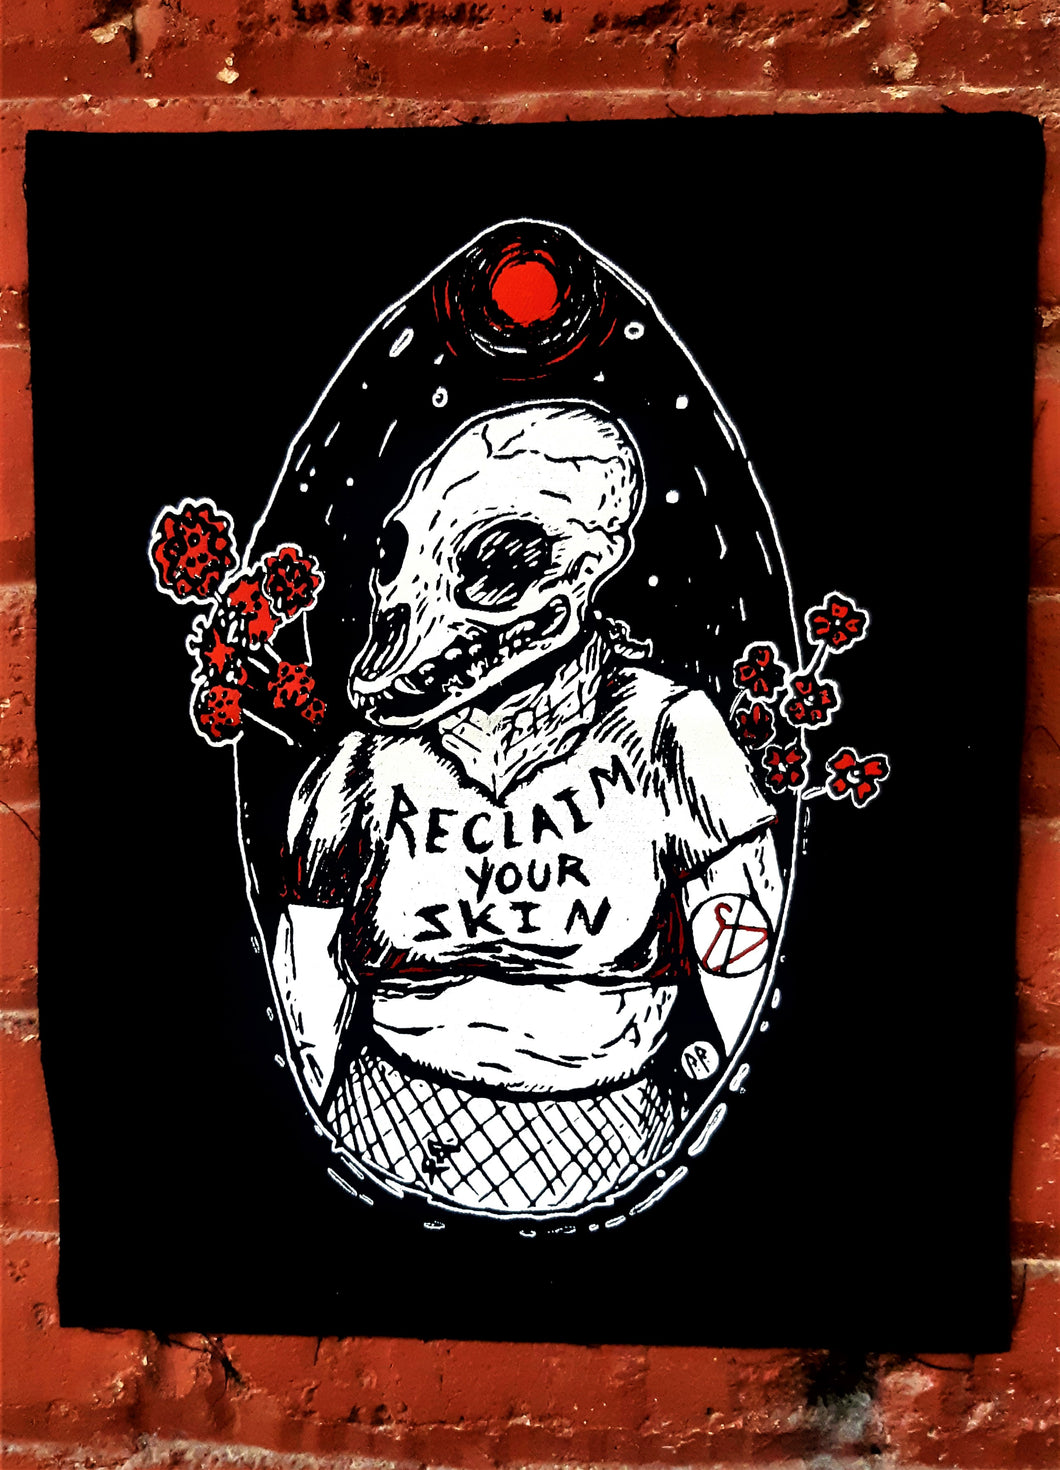 Reclaim your skin Backpatch - Feminist seal skull with red moon - White and red ink - Screen printing on black fabric